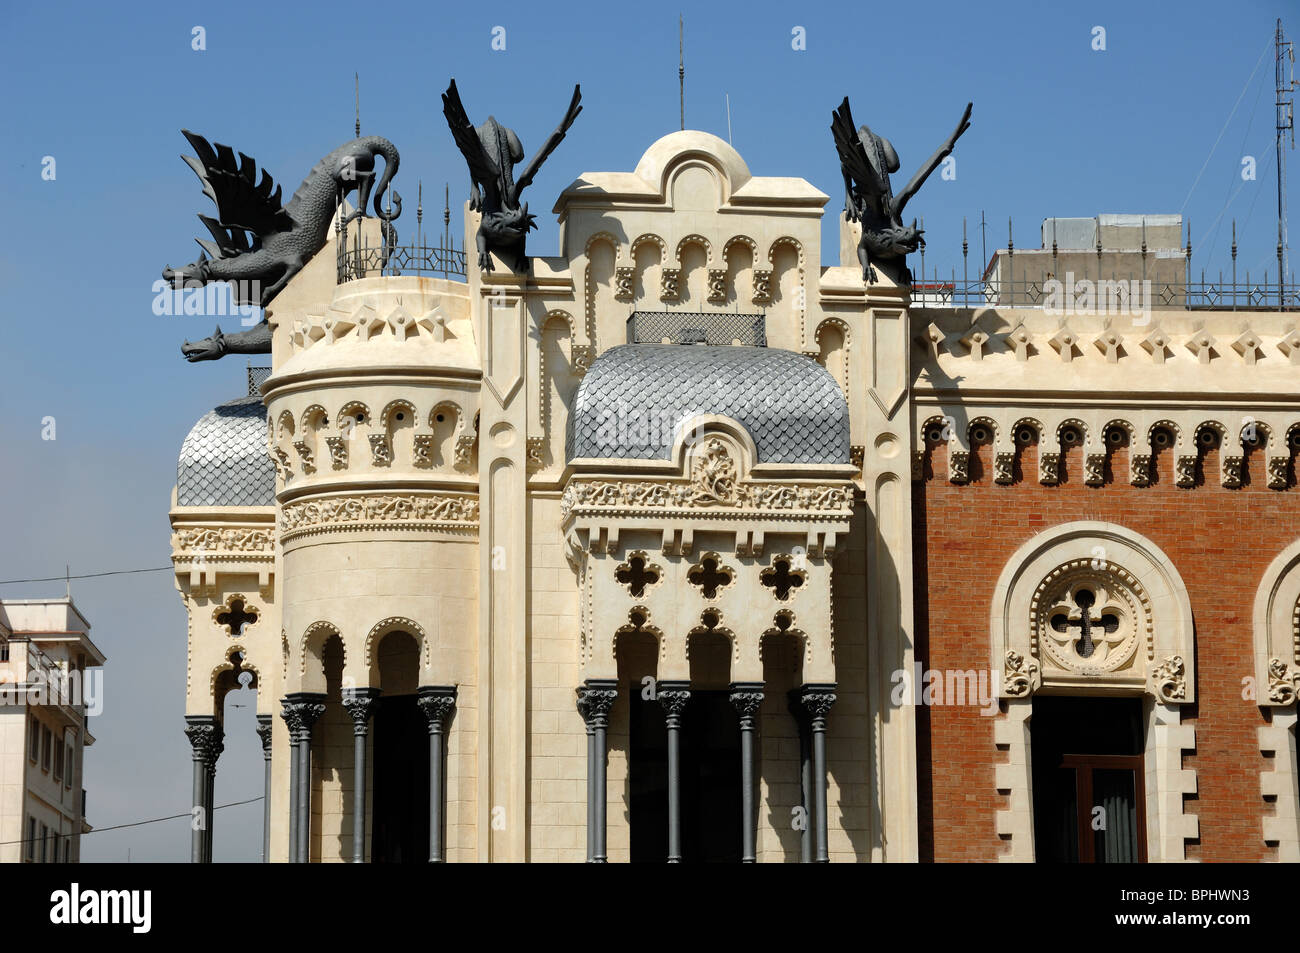 House of the Dragons, or Casa de los Dragones (1900-1905), an Eclectic Style Commercial Building with Dragon Sculptures on the Roof, Ceuta, Spain Stock Photo